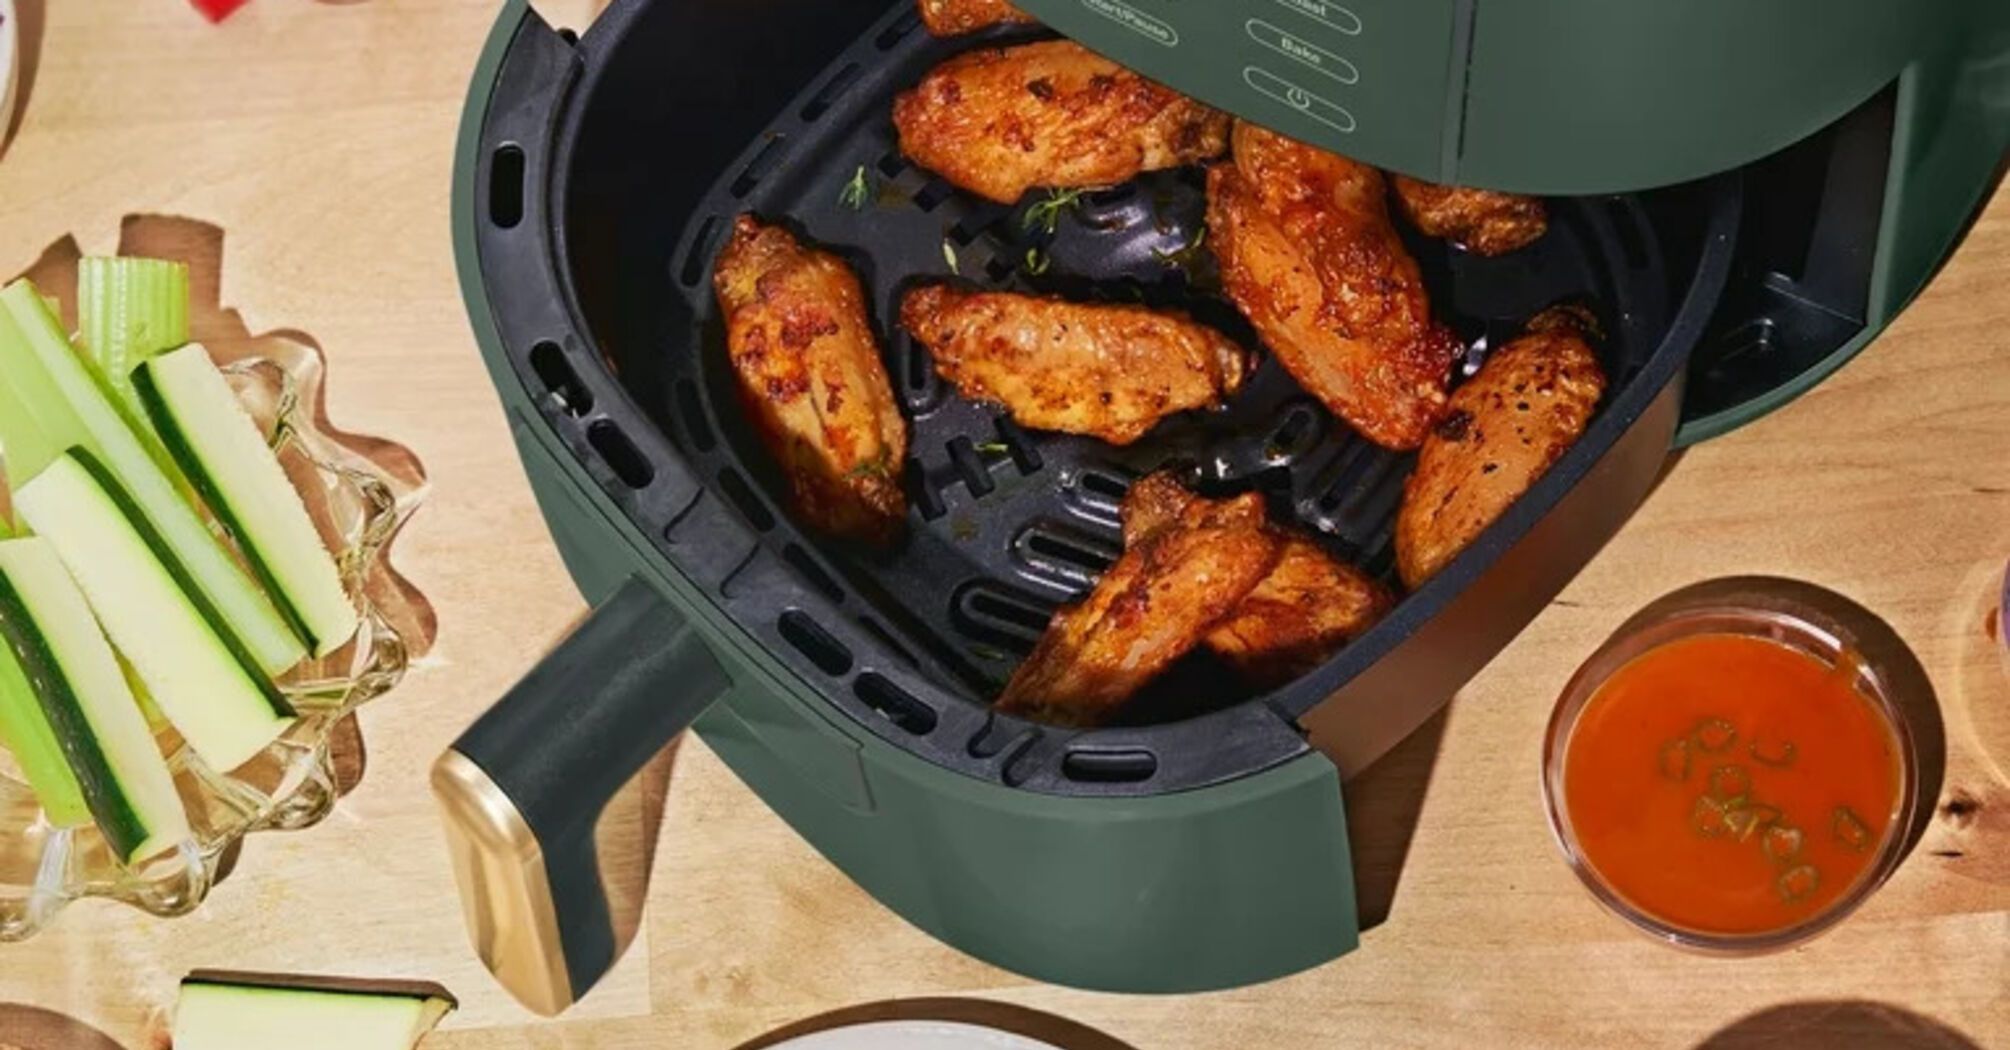 Pros and cons of air fryer